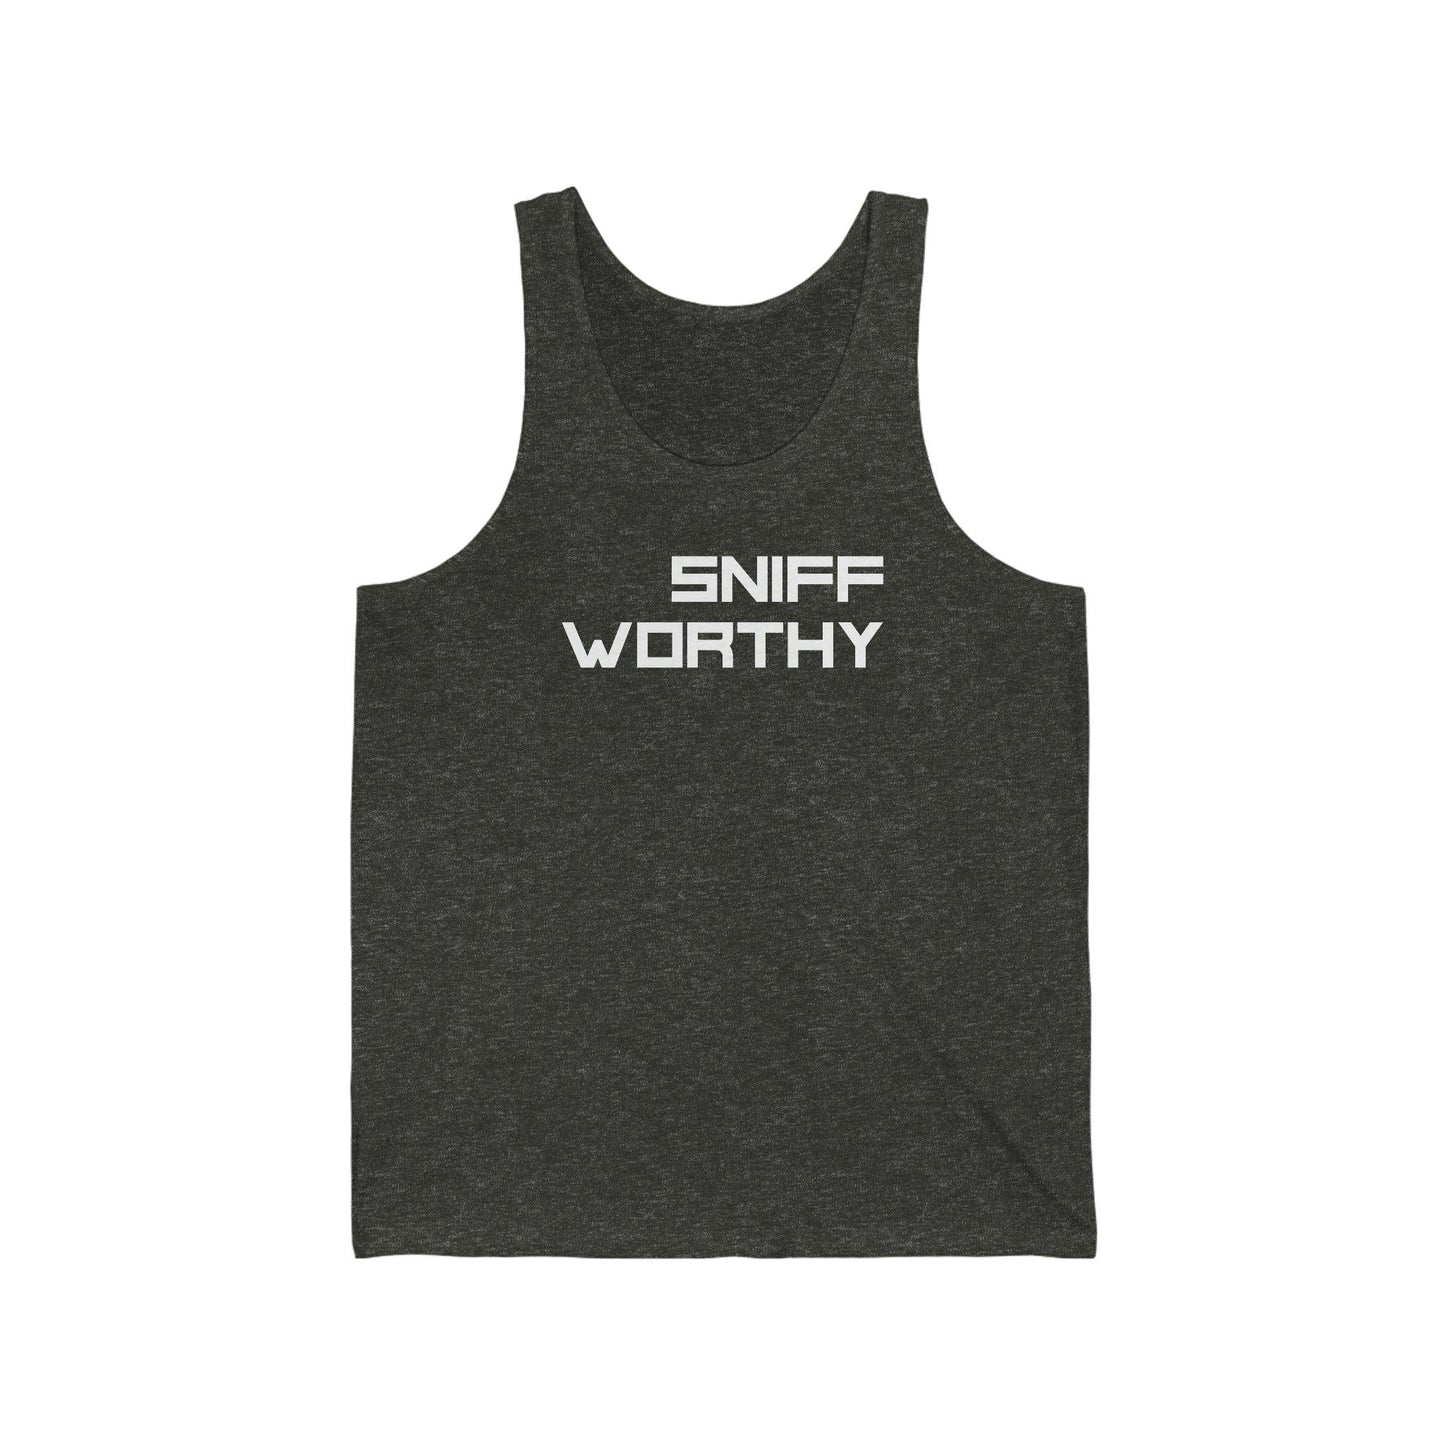 Sniff Worthy - Wicked Naughty Apparel